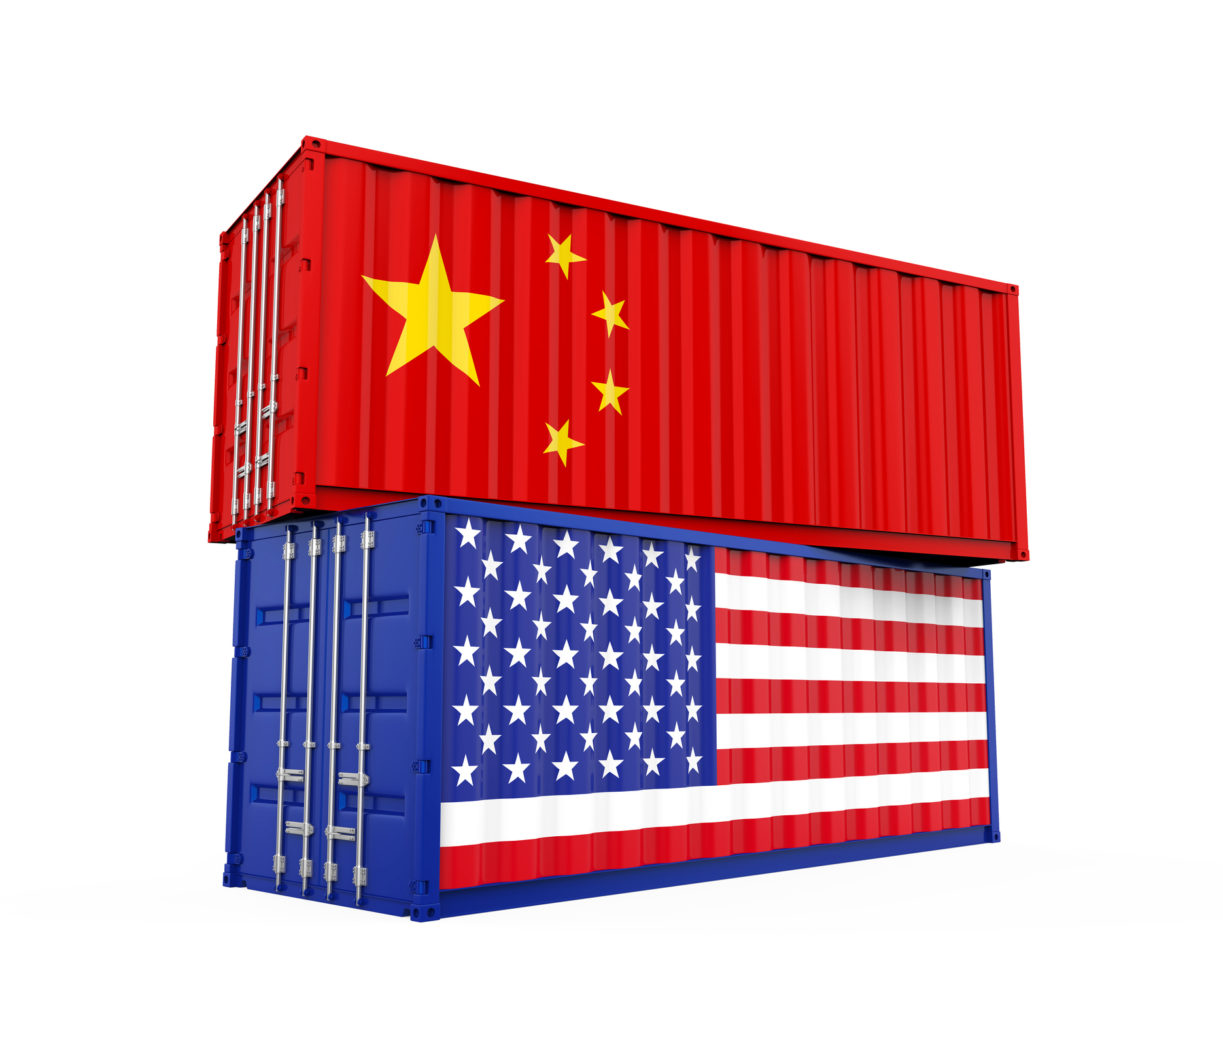 U.S. is considering raising tariffs on Chinese goods in order to protect its green industry. (Photo: UWL, Inc.)